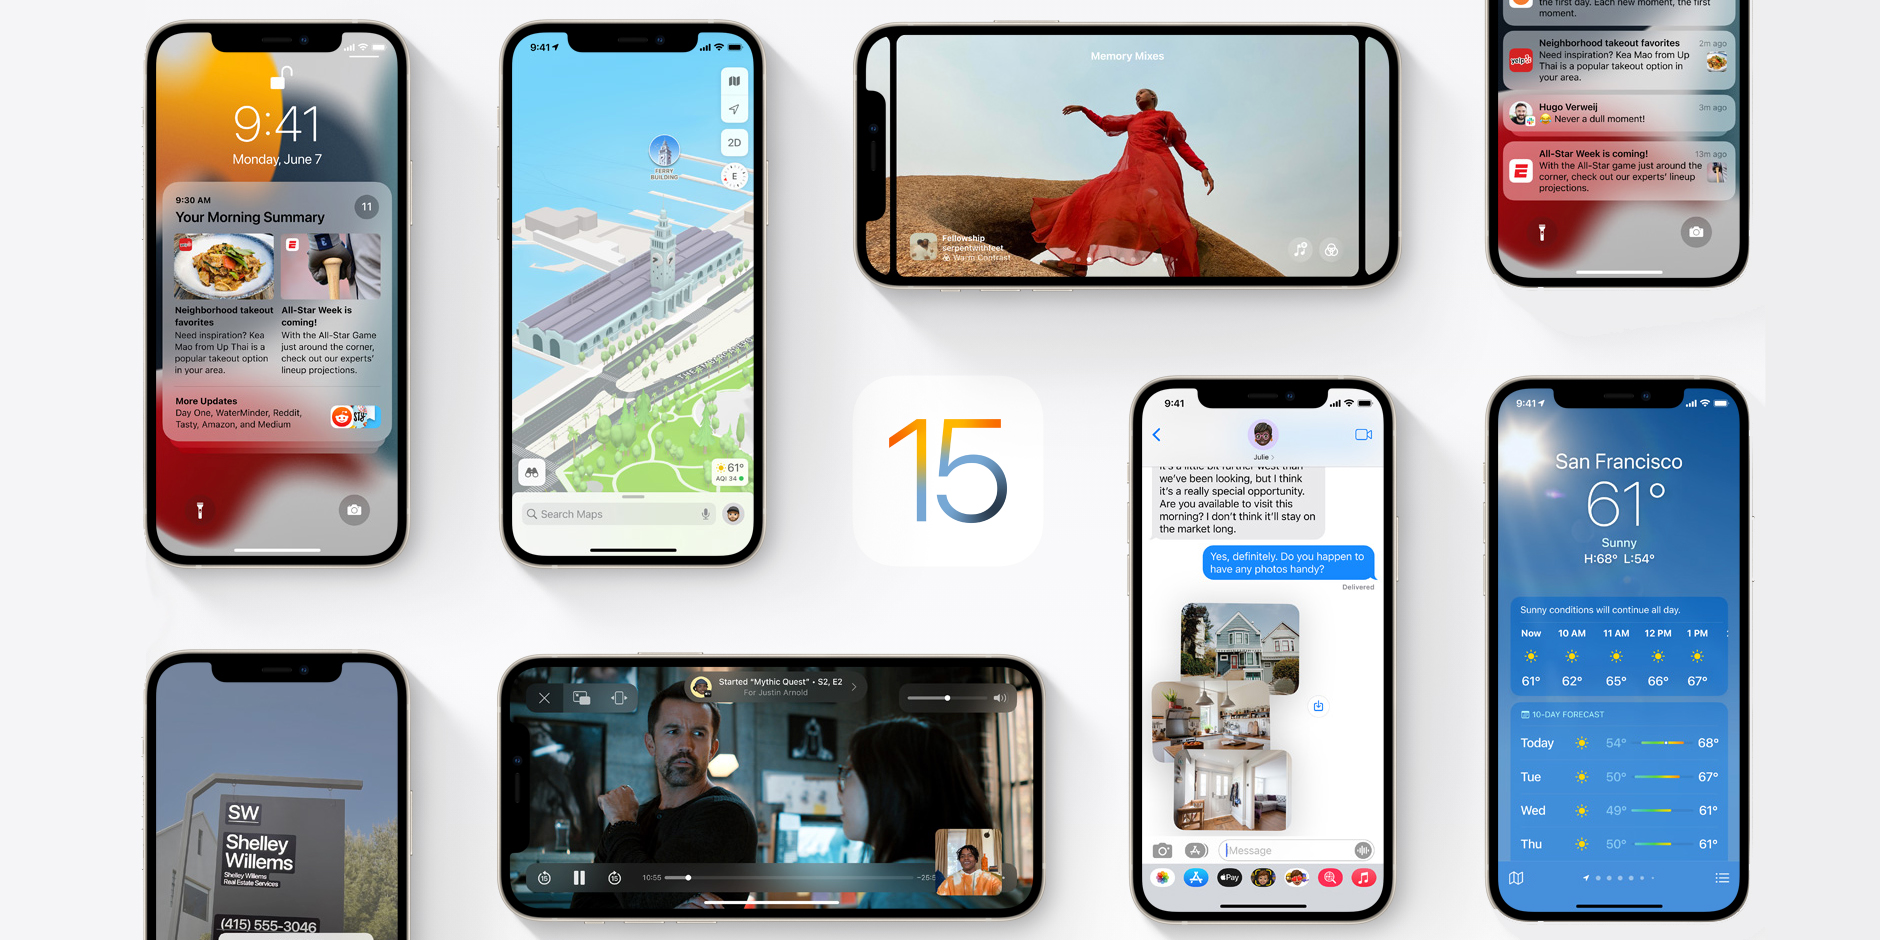 iOS 15, iPadOS 15, watchOS 8 and tvOS 15 will be released on September 20